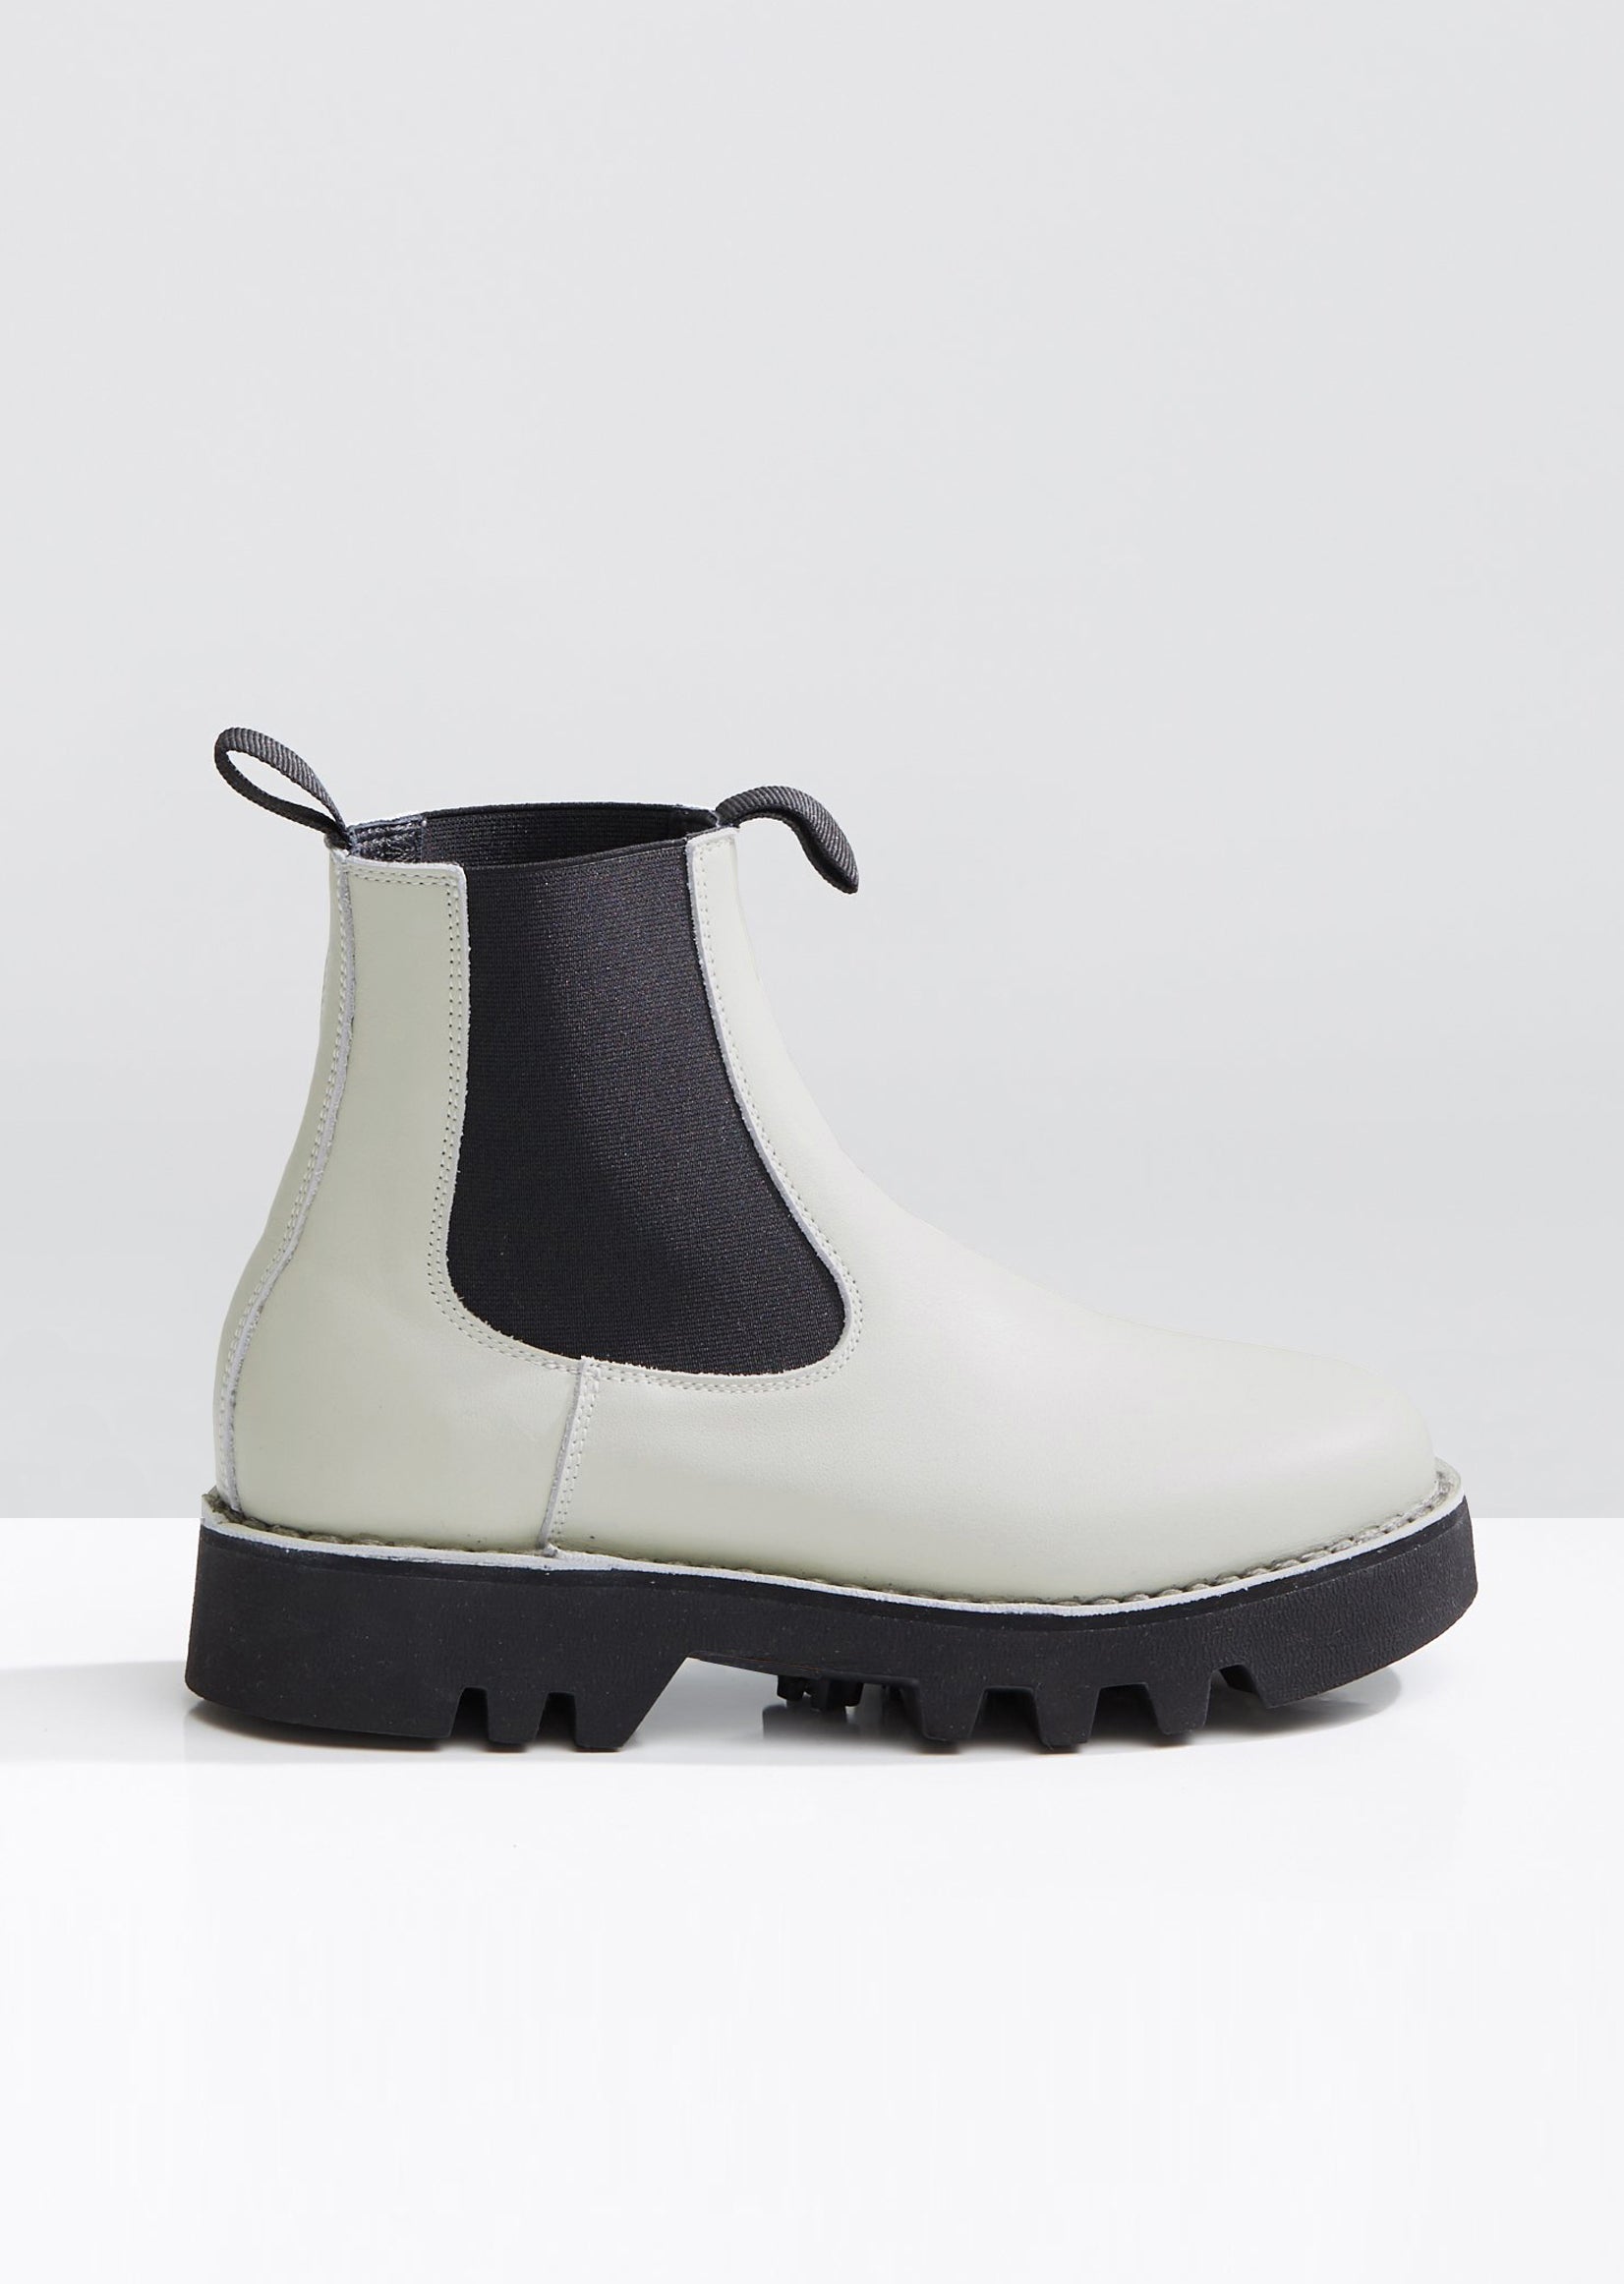 Nappa Leather Slip On Boots by Sofie D 